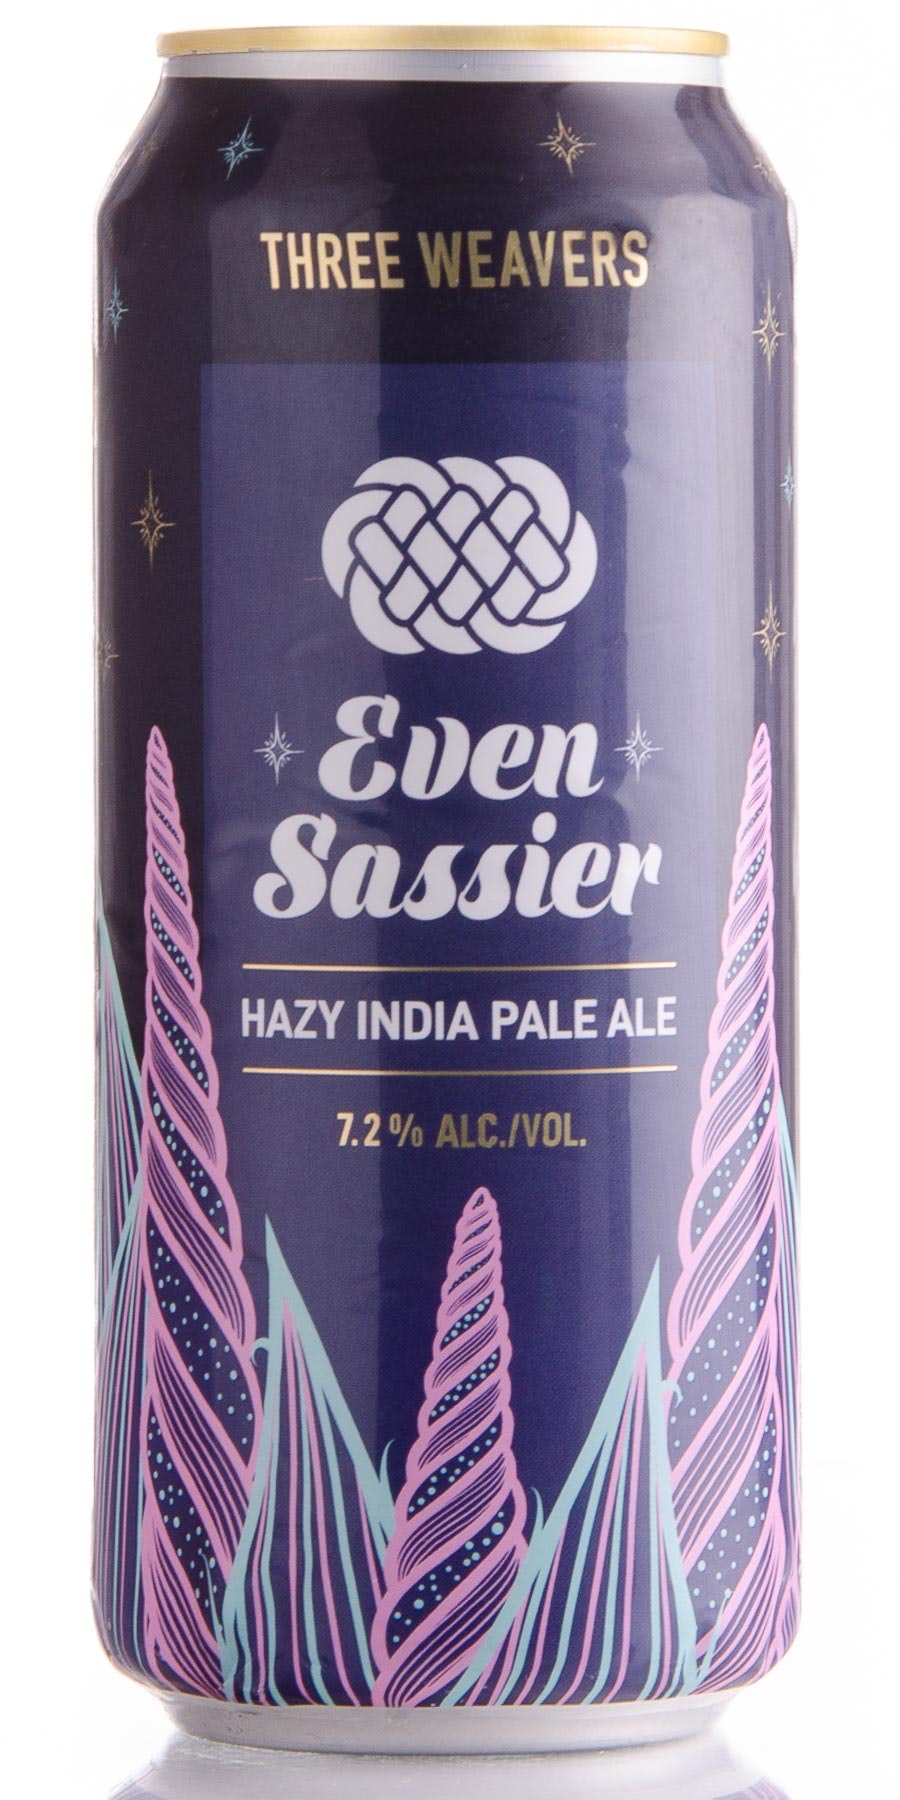 Sipping on Sass: A Zesty Three Weavers Beer Critique